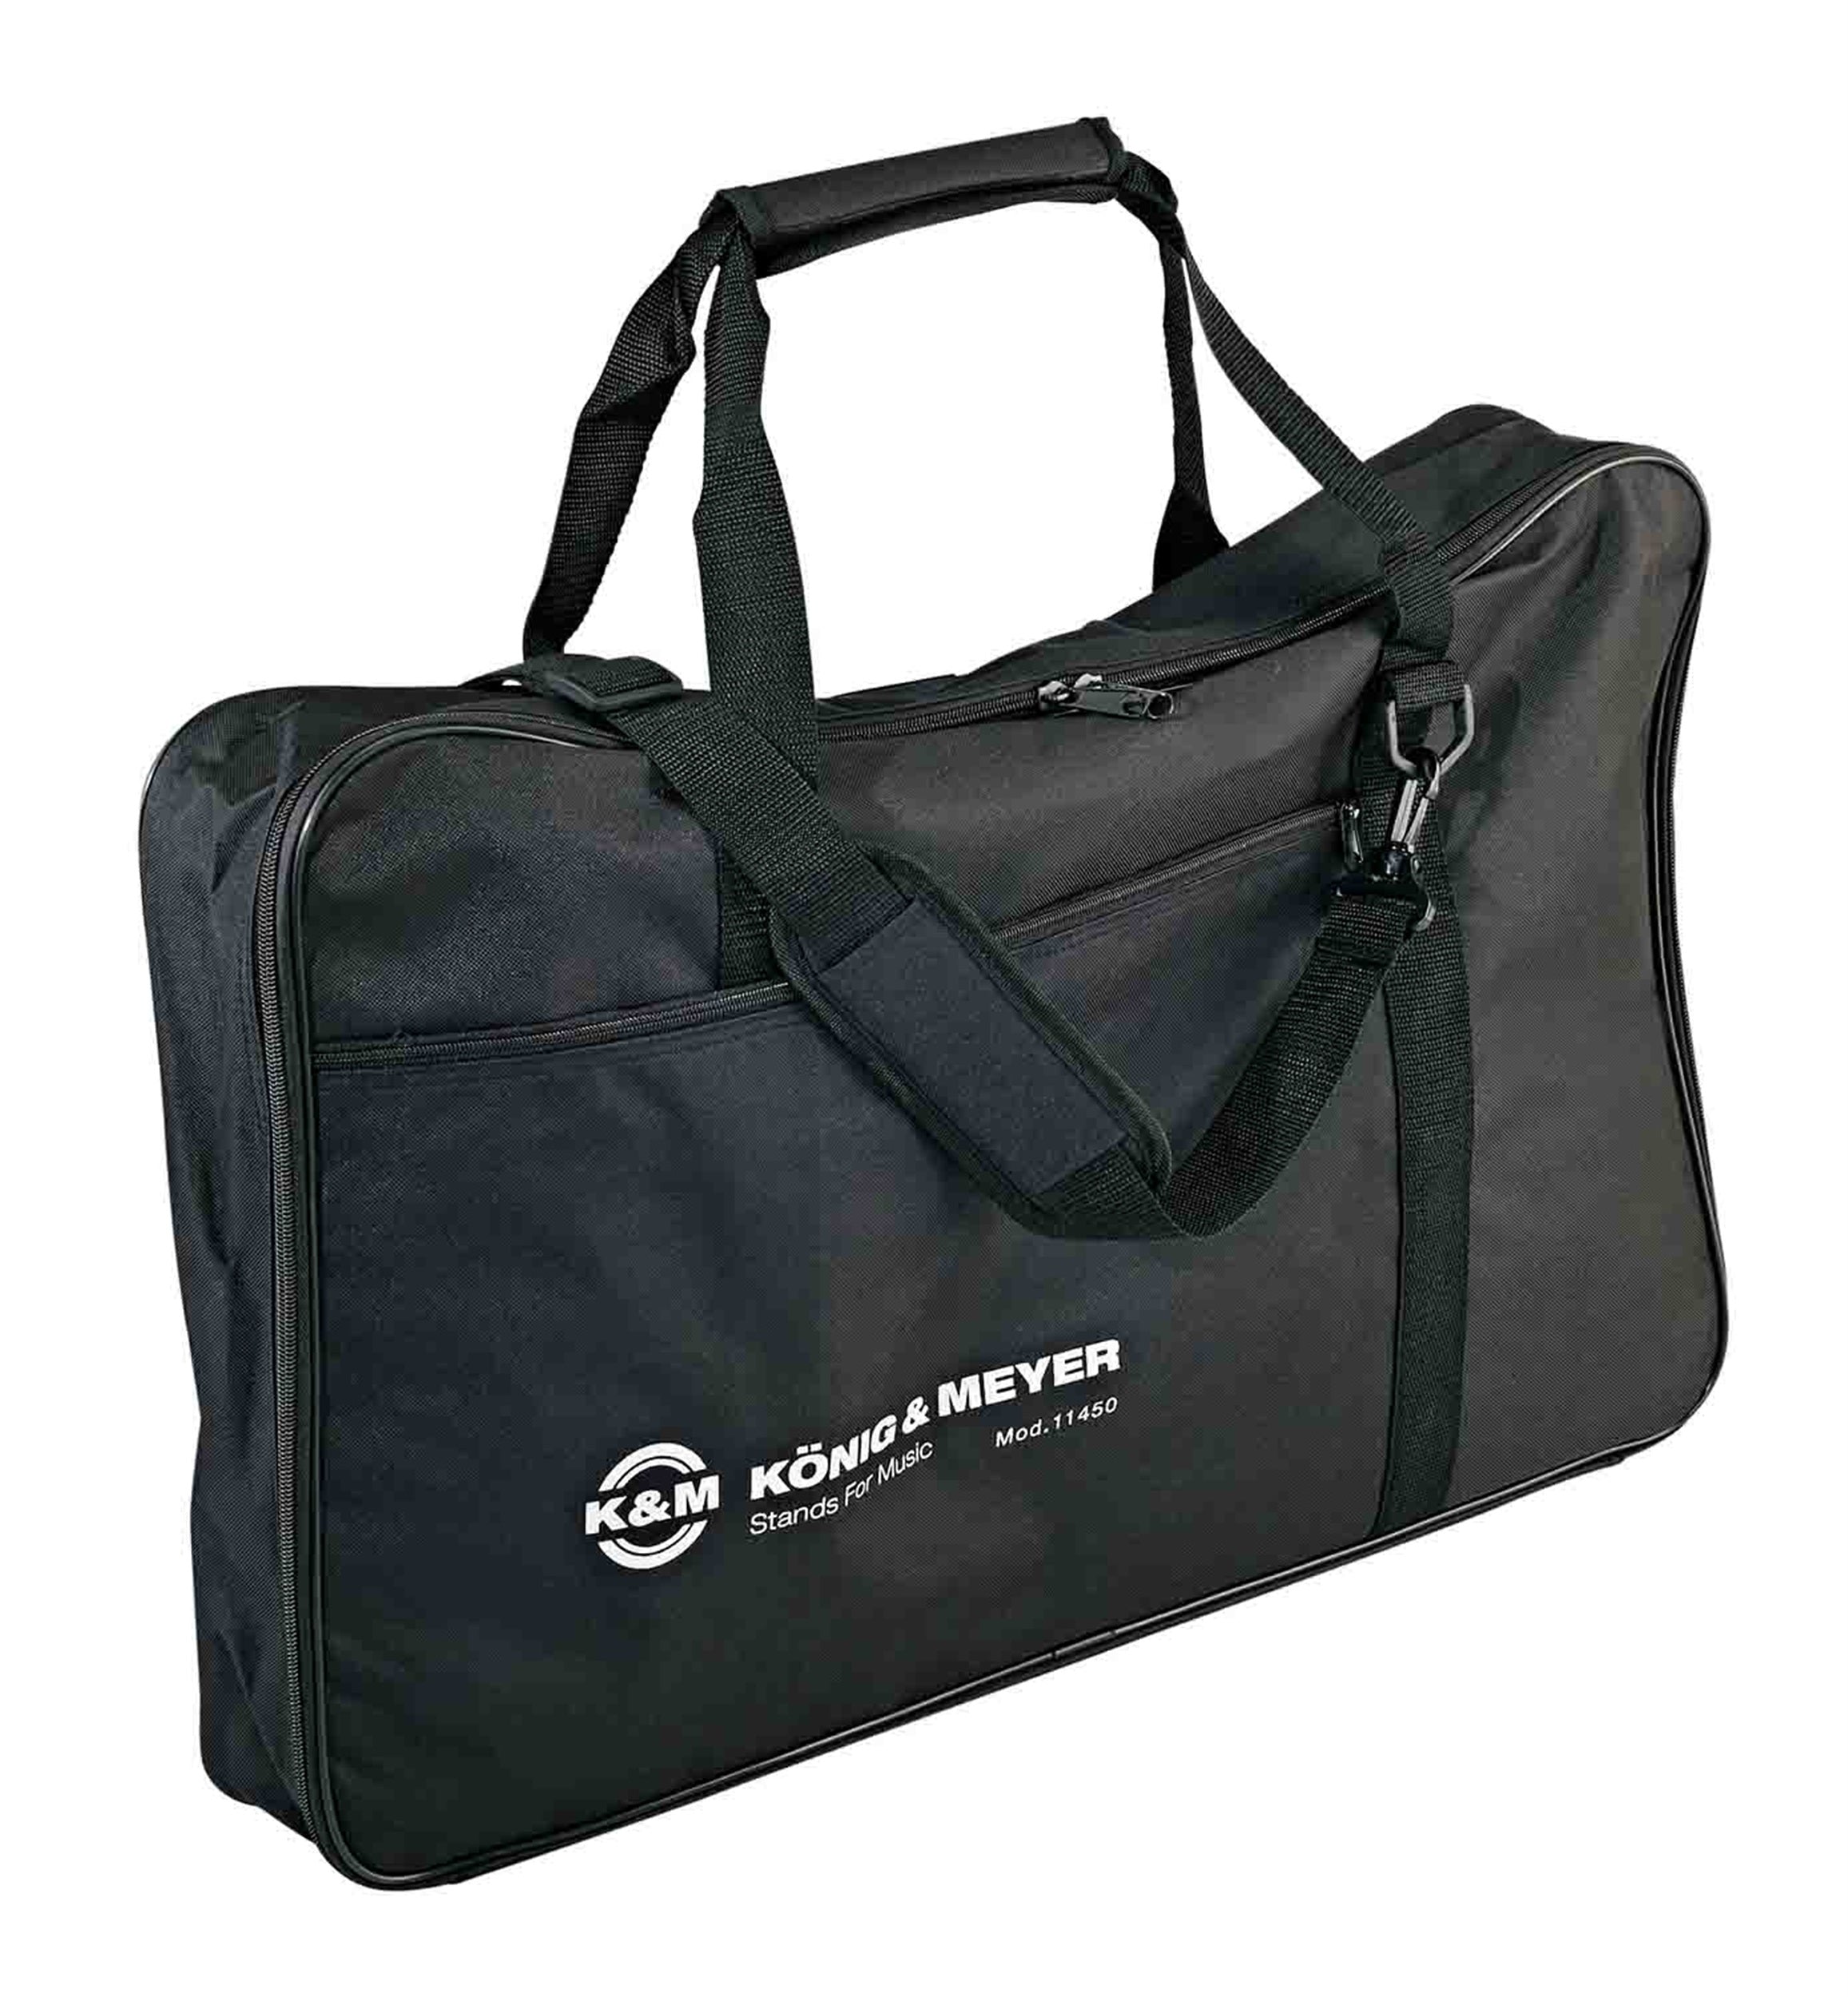 K&M 11450-000-00, Waterproof Carry Case for 118 Series Orchestra Music Stands - Black by K&M